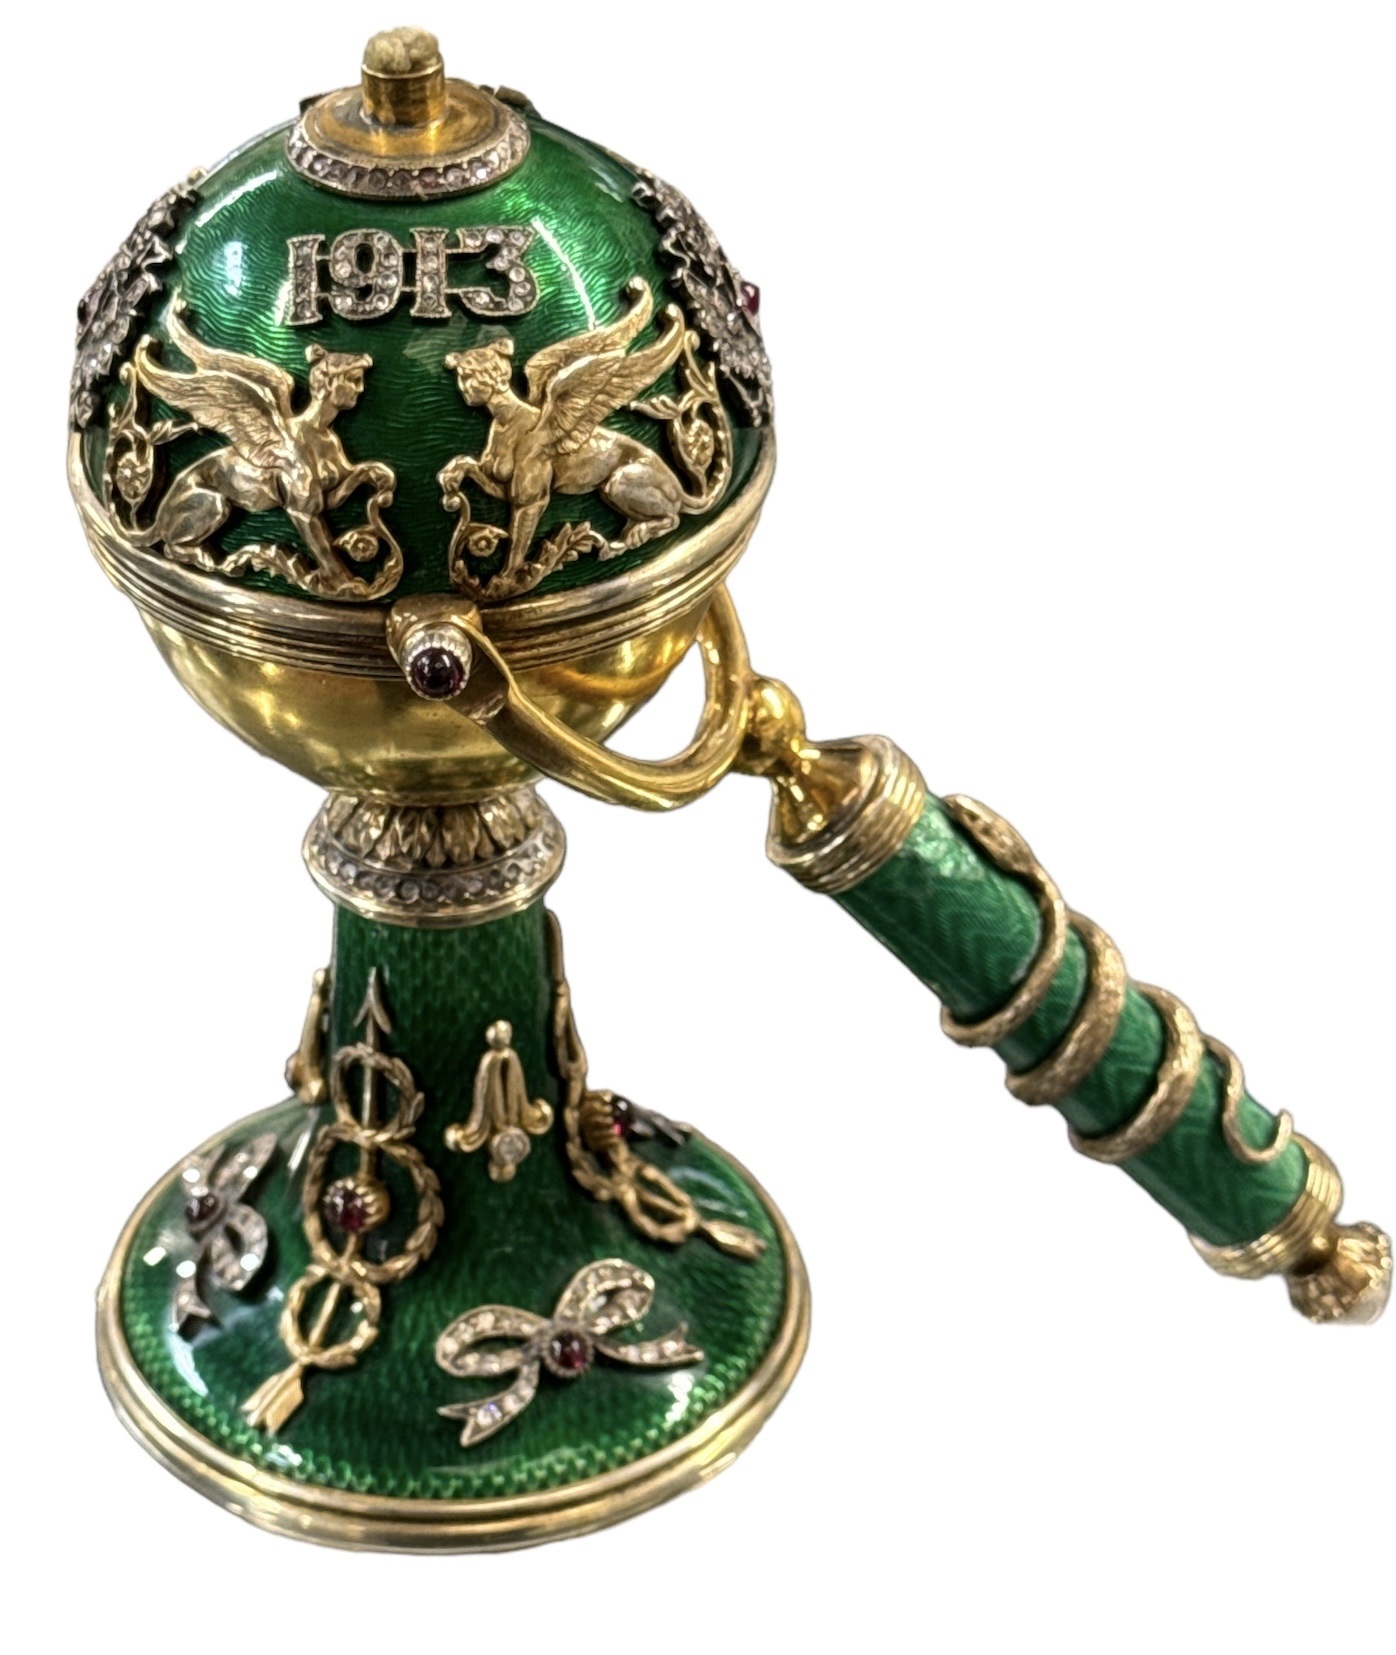 Two Day Sale of Antiques & Fine Art with Asian Art, Jewellery and Silver (London)